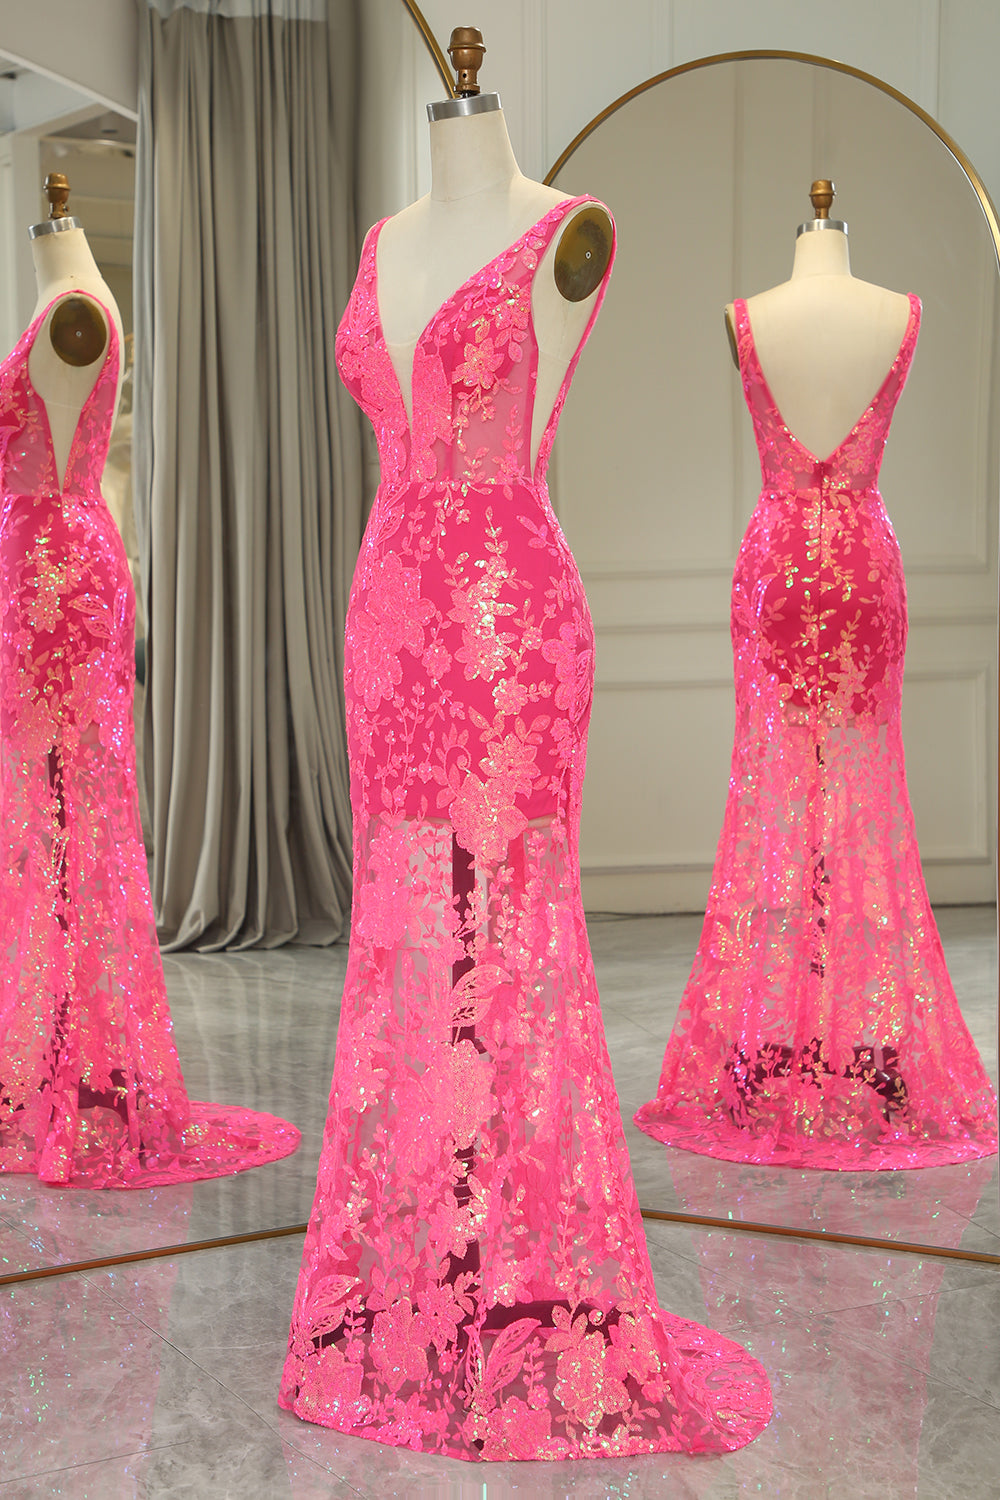 Prom Dress Ideas 2045, Sparkly Fuchsia Mermaid V Neck Long Prom Dress With Sequined Appliques